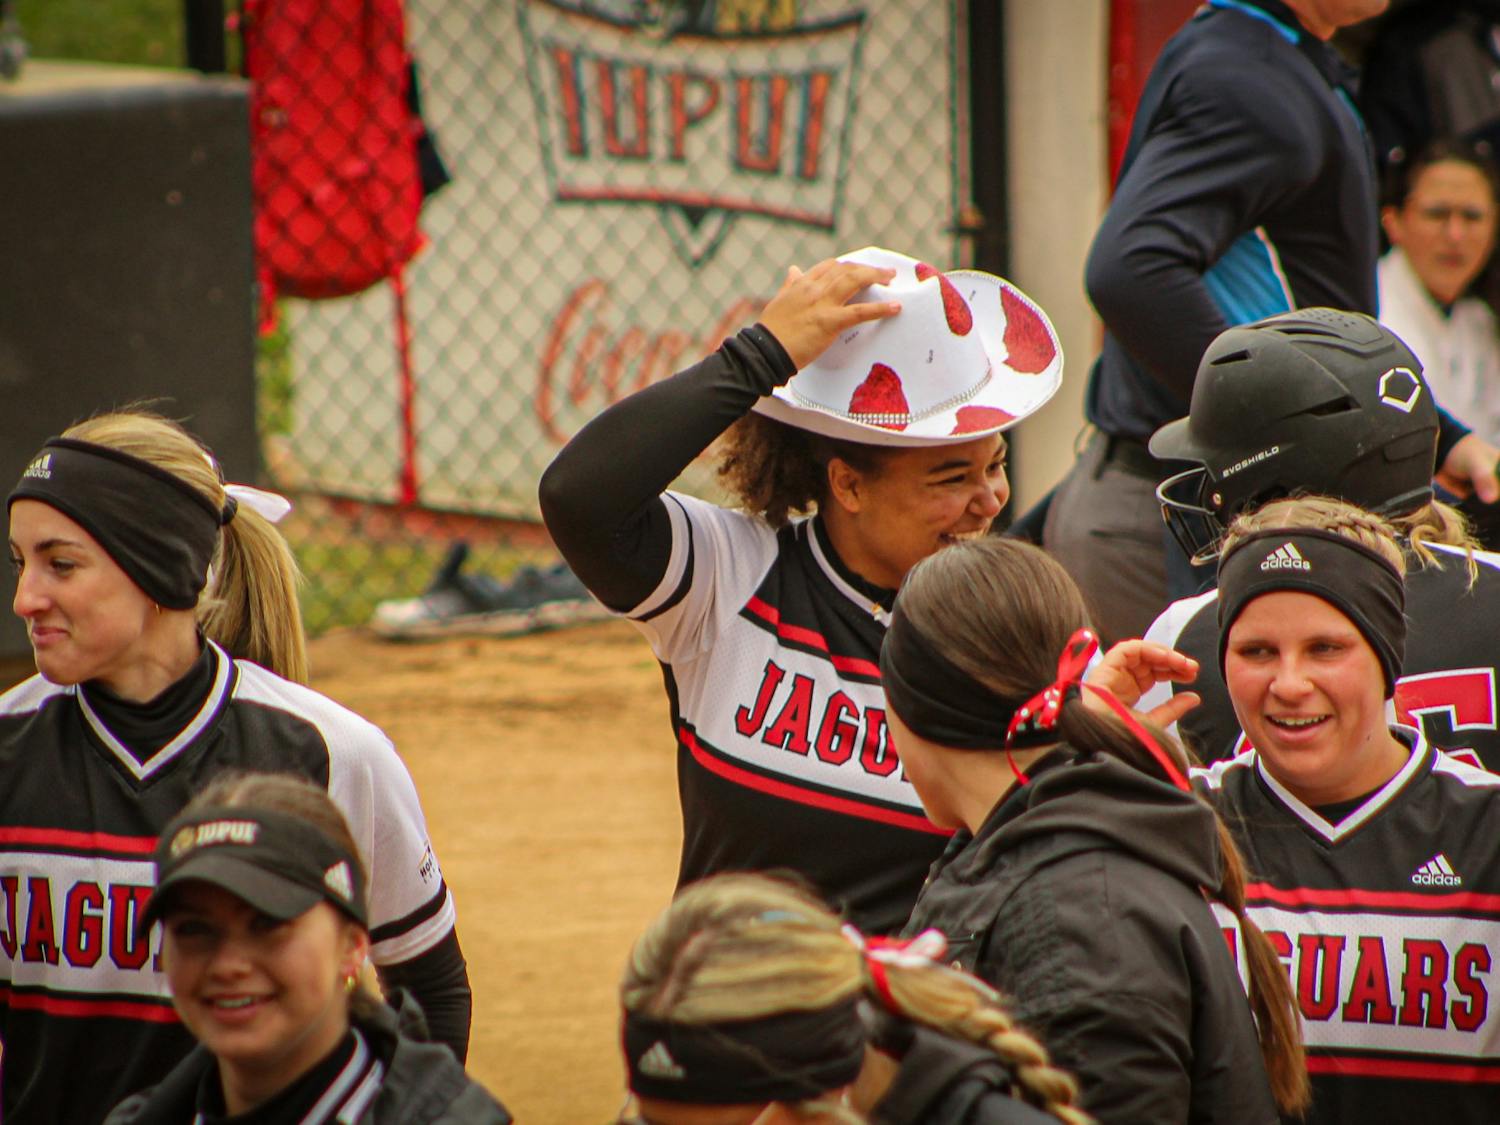 Jags Softball Split a Doubleheader with the Colonials